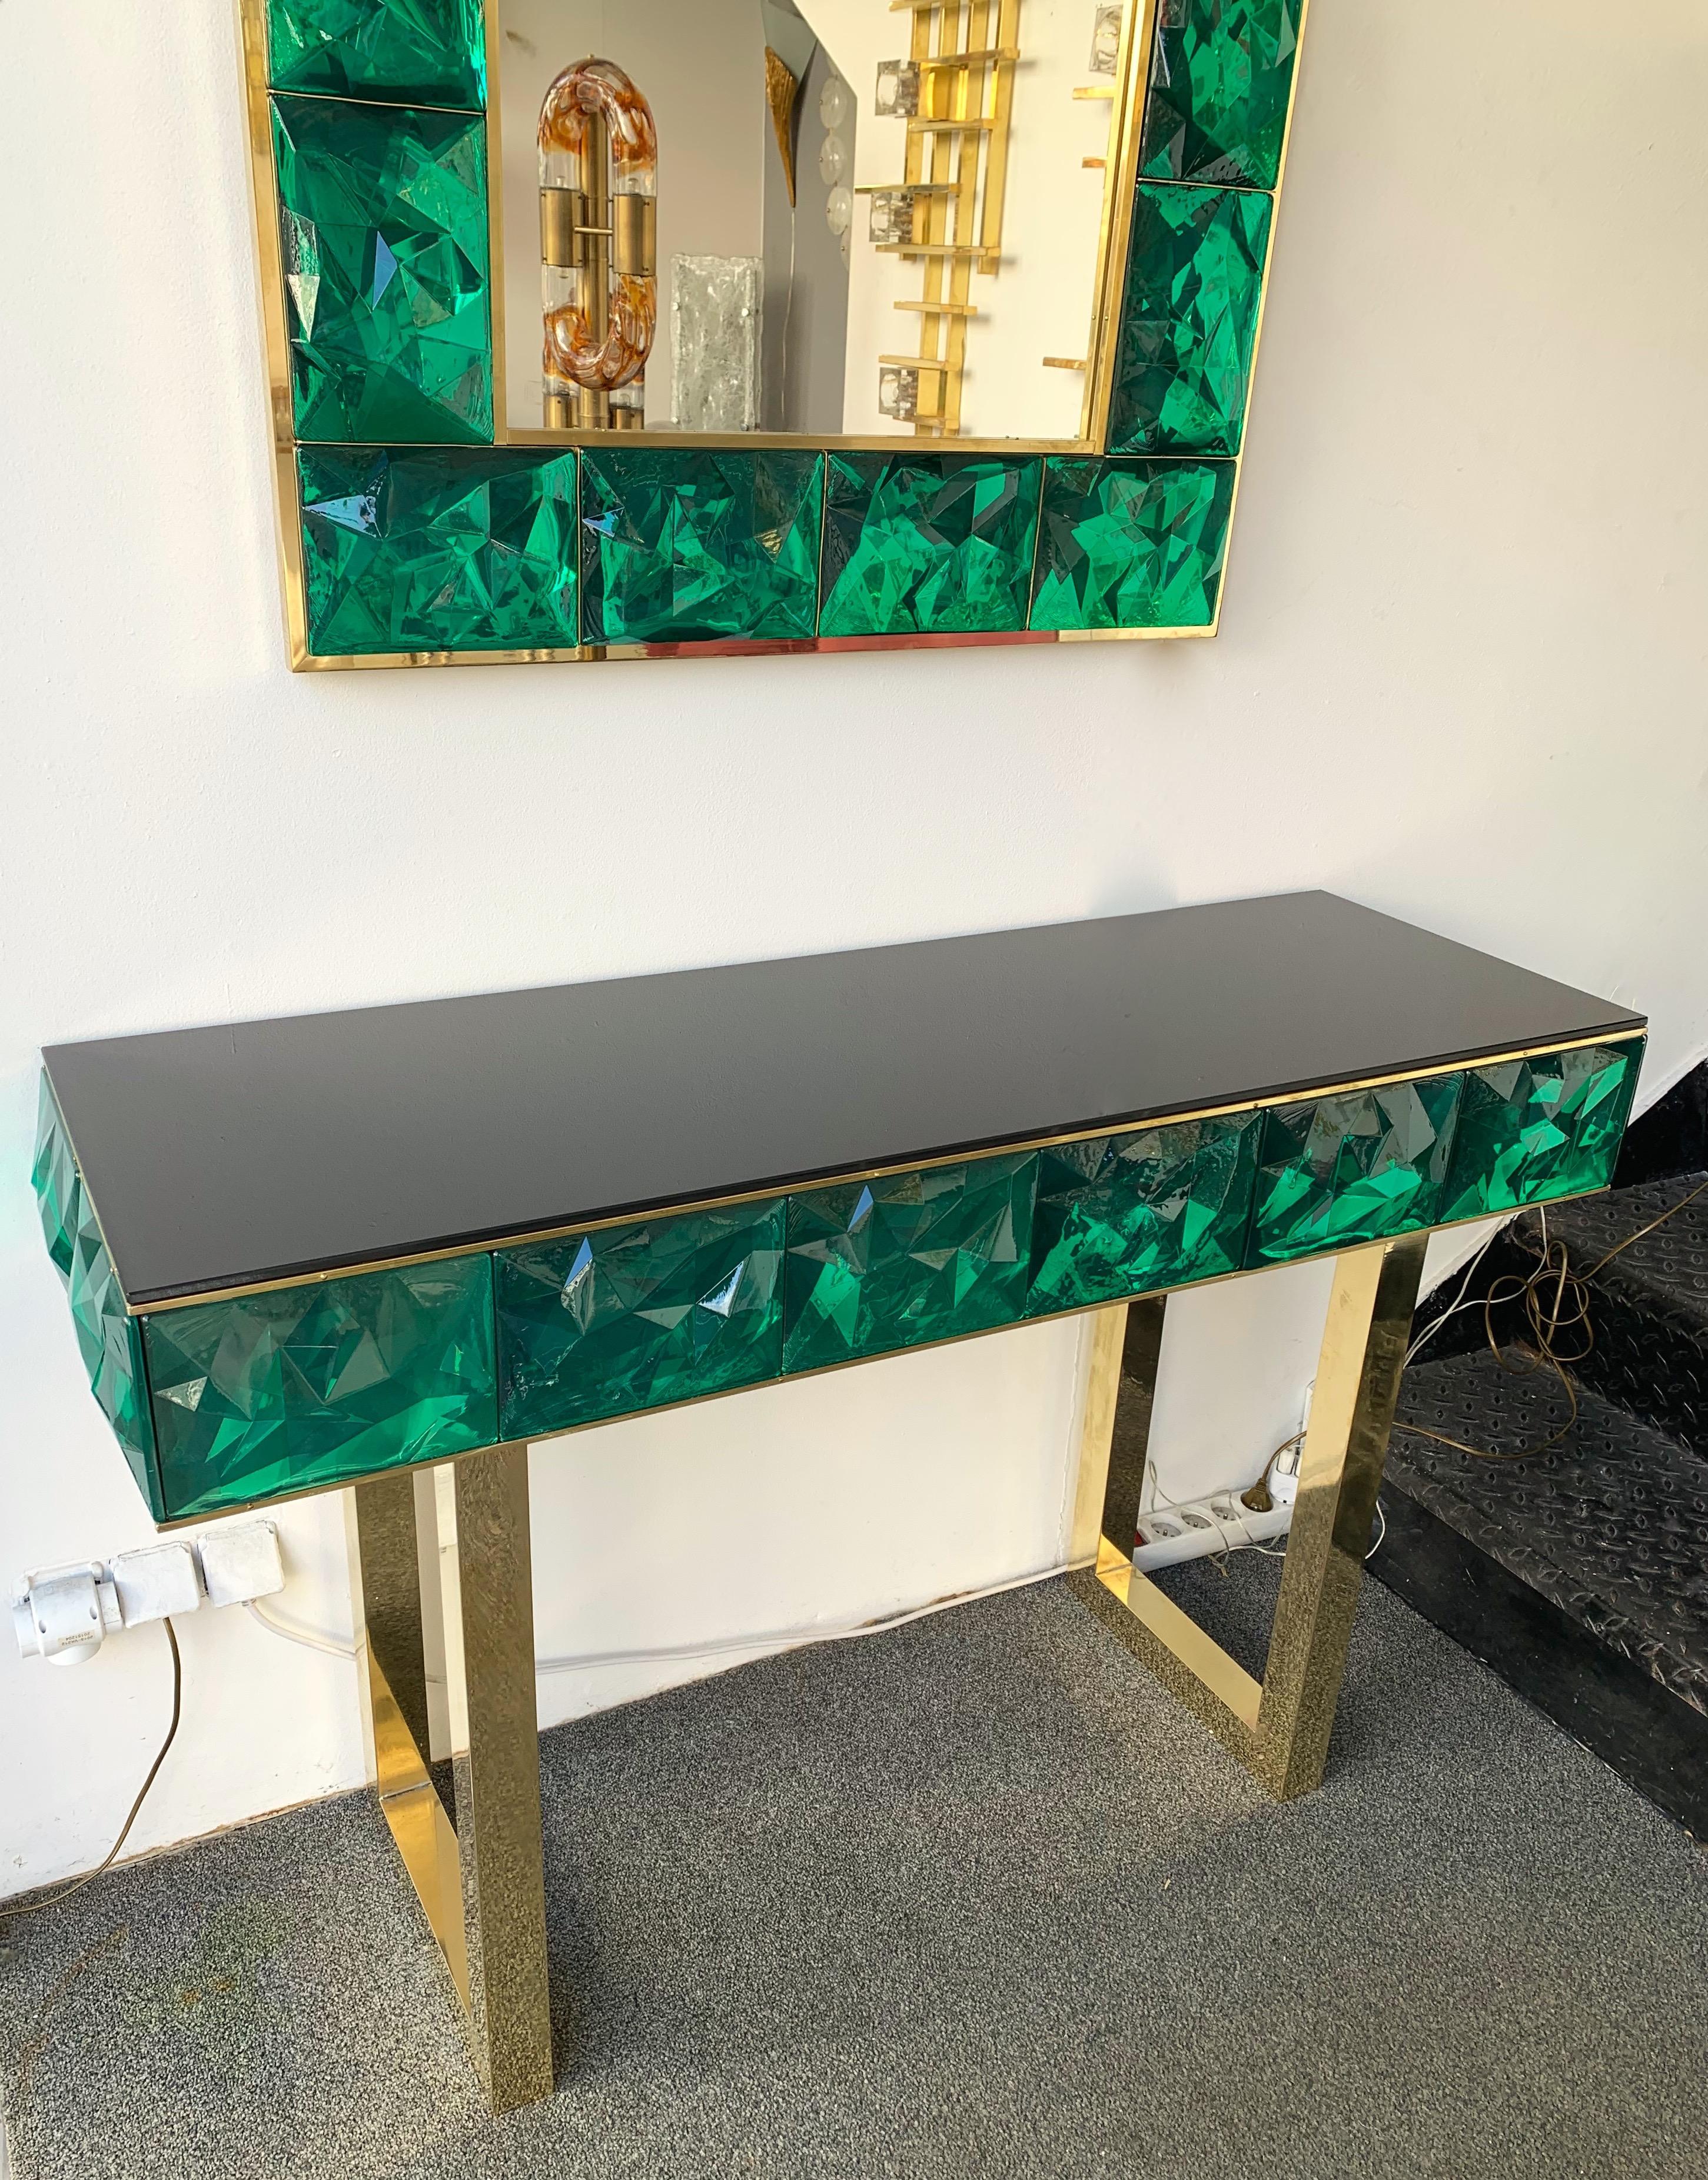 Contemporary wall mirror and console set, full brass and large pieces of green emerald Murano glass with relief diamond point. Small artisanal workshop. The mirror can be hang horizontally also.

Measurements in description for the mirror
Console